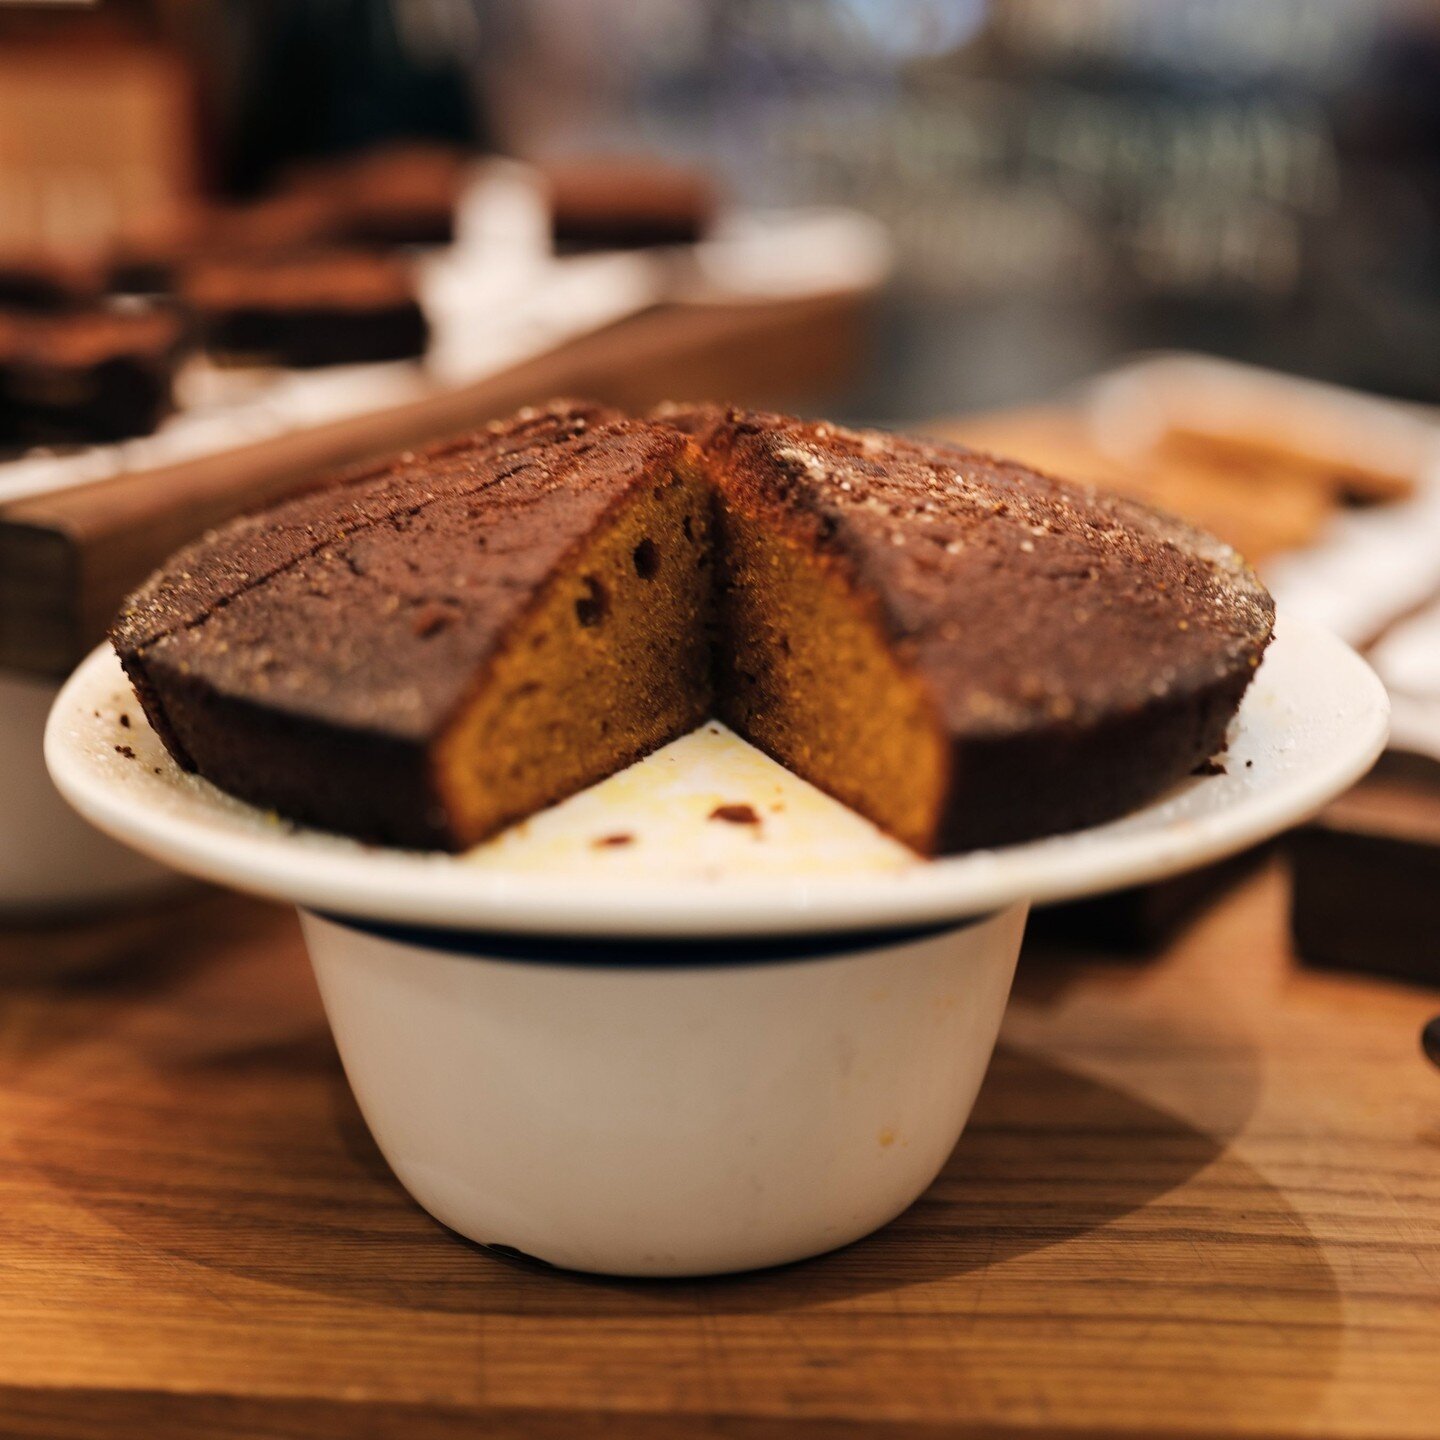 Need a little pick-me-up? Swing by Kitchen by Mike for a last-minute coffee and a sweet treat! Our homemade cakes will satisfy your cravings and add sweetness to your day. 

#AfternoonTea #CoffeeLovers #SweetTreats